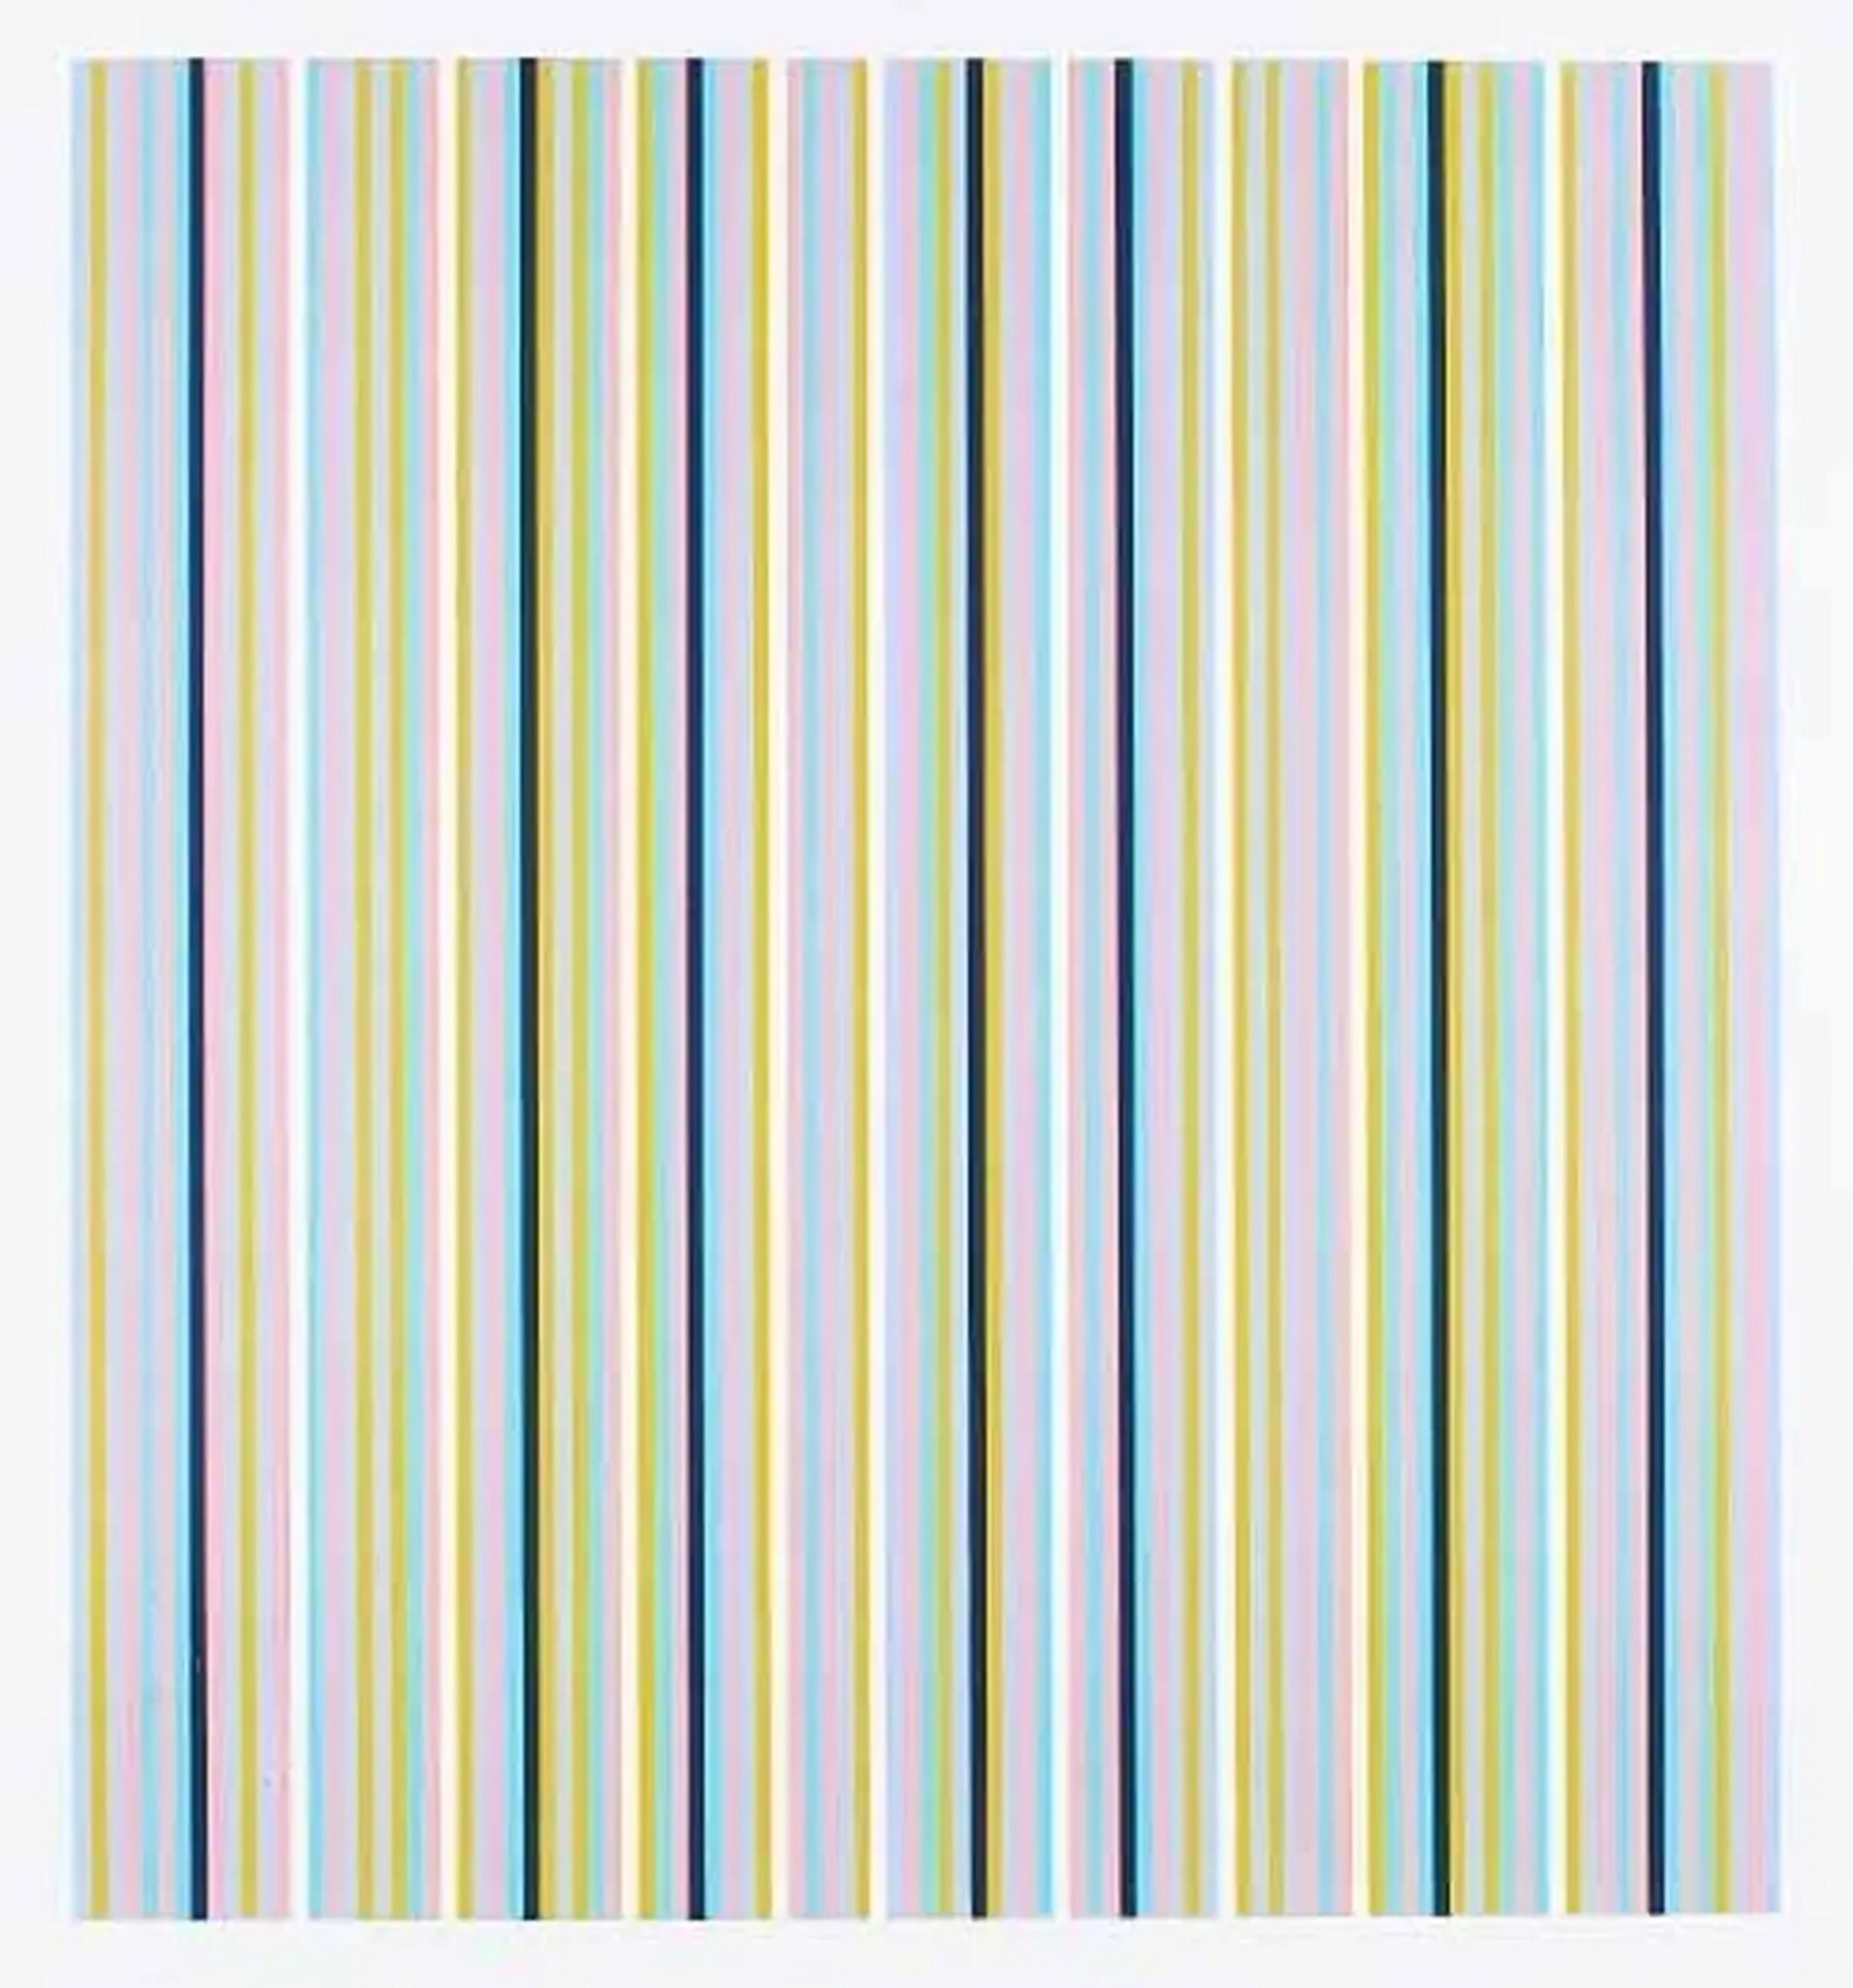 A Buyer's Guide to Bridget Riley